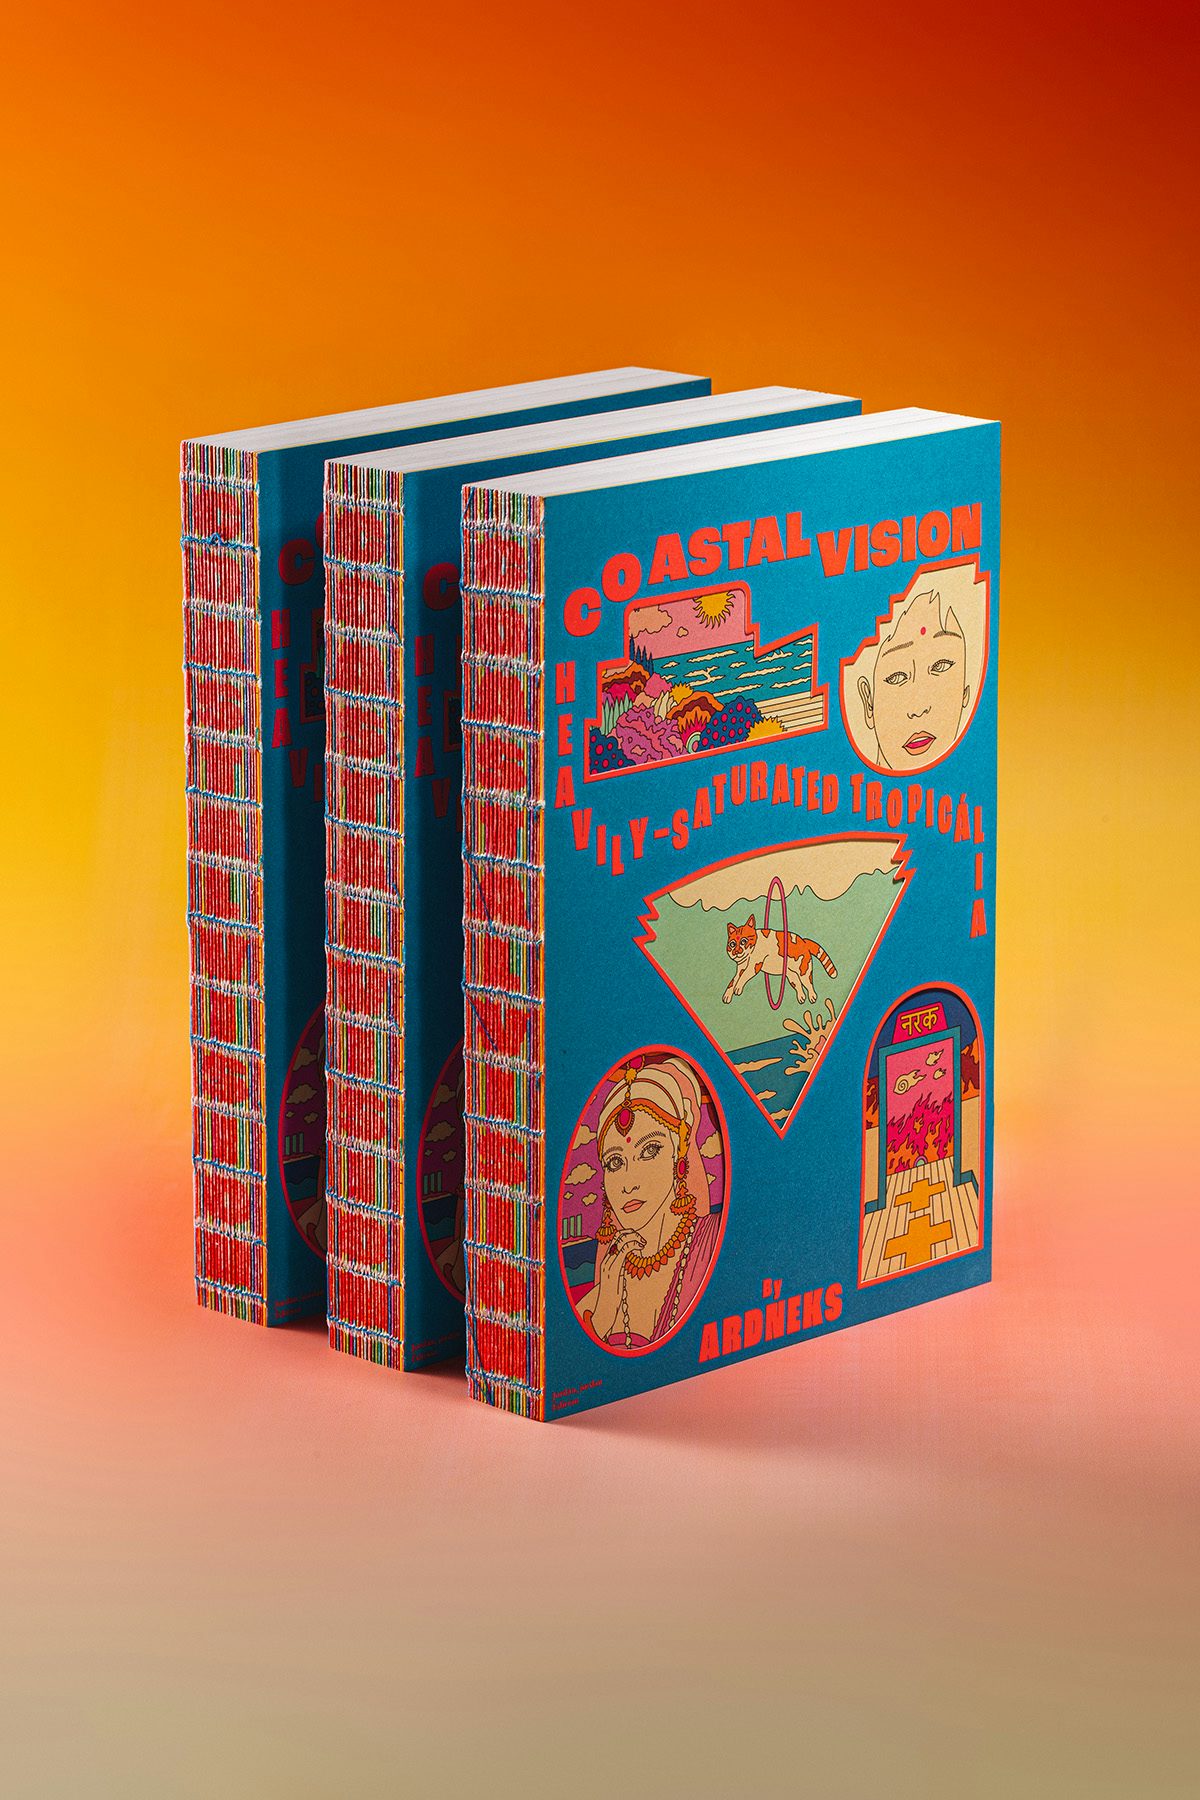 Photograph showing the open spine and colourful illustrated cover of Ardneks' book Coastalvision